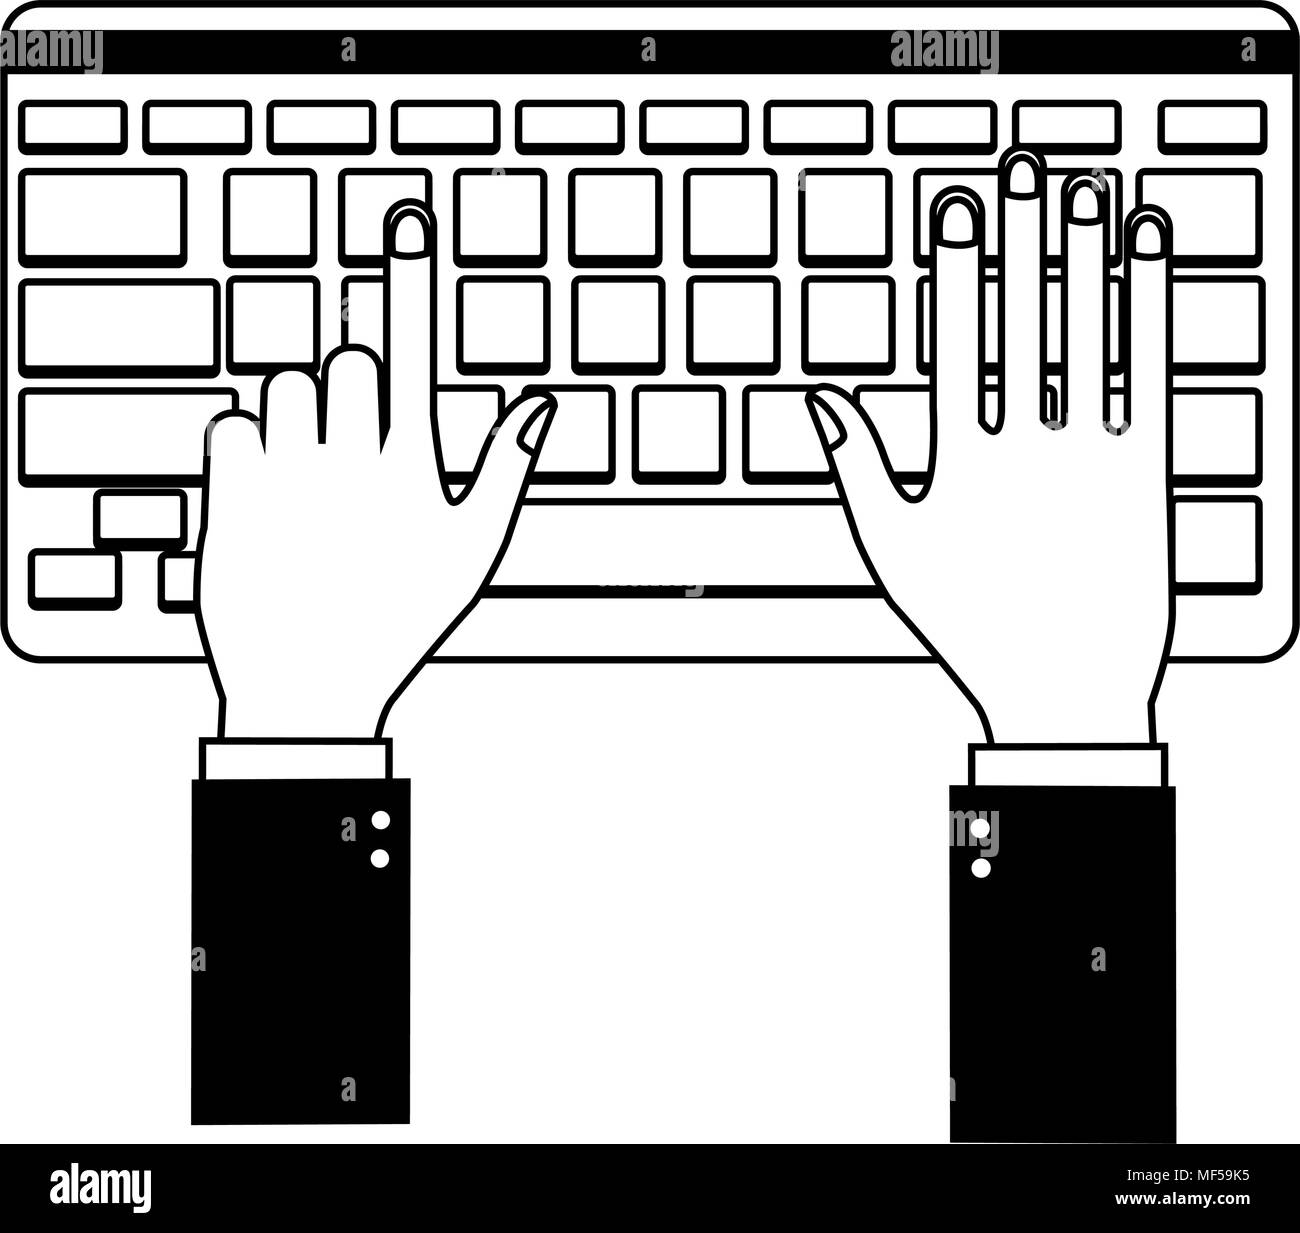 Hands using keyboard on black and white Stock Vector